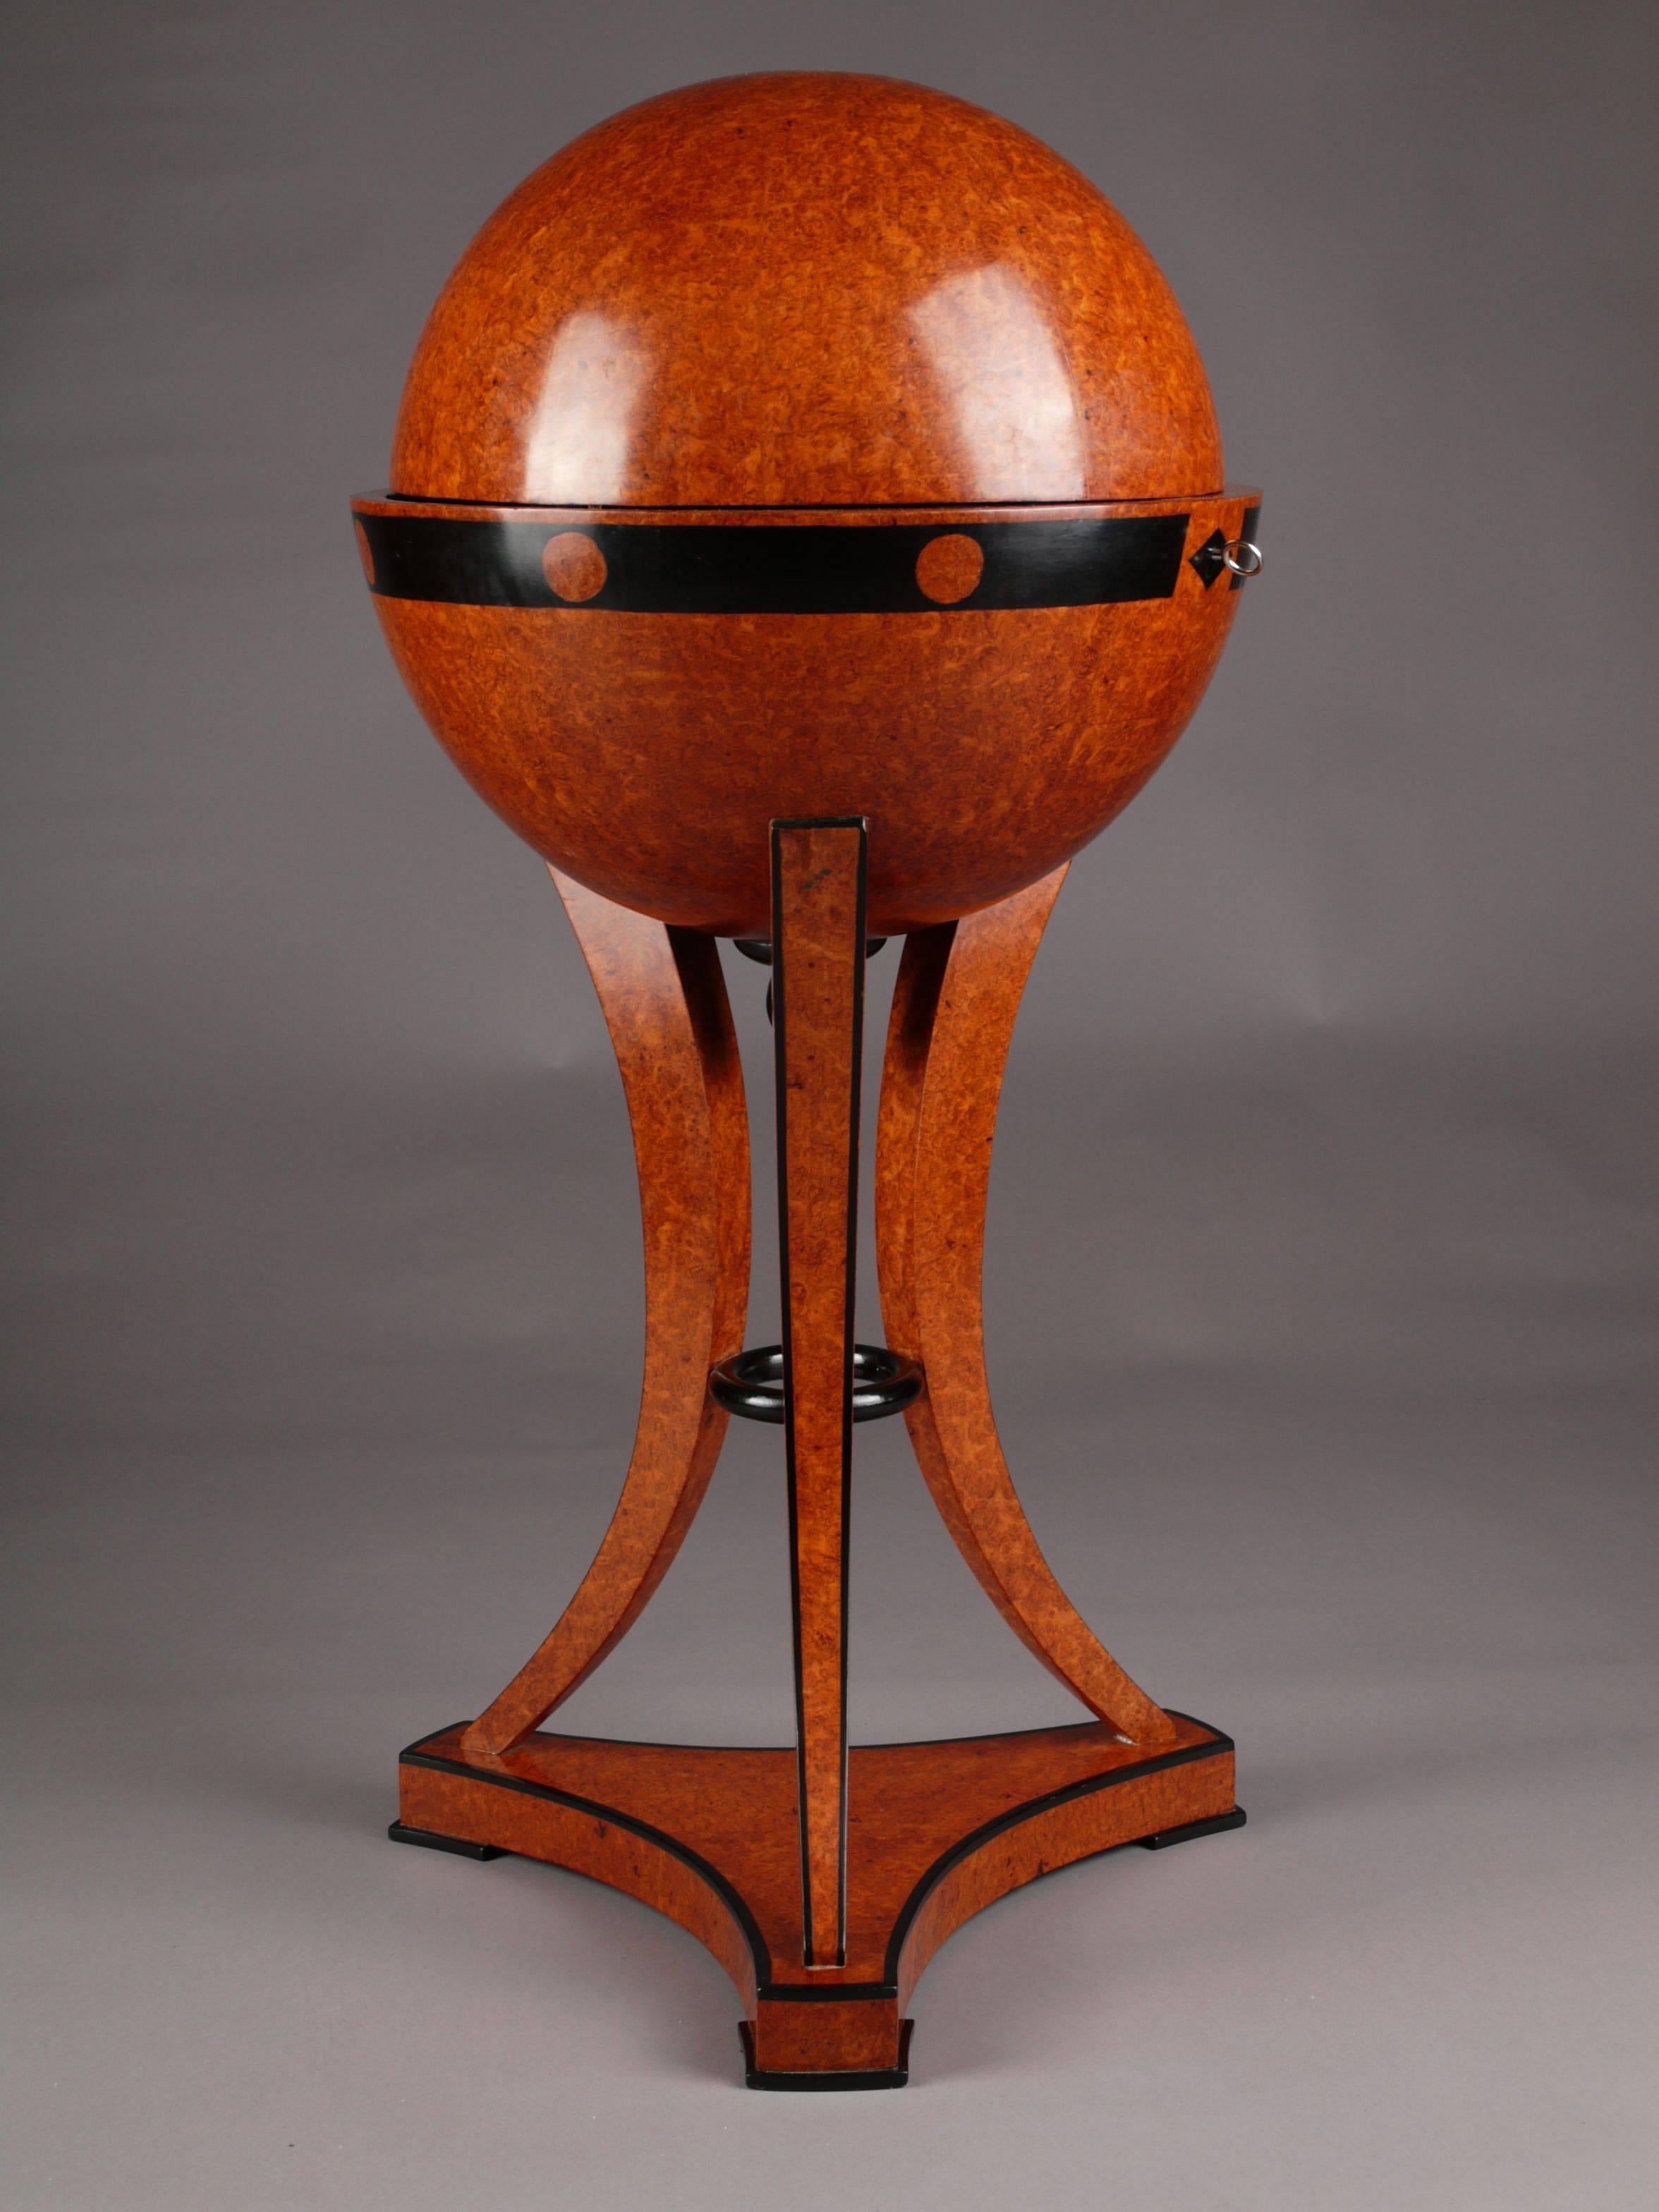 Highly significant globe sewing table in Vienna Biedermeier style.
Bird’s eye maple root veneer on solid beech, partially ebonized.

(G-Sam-44).